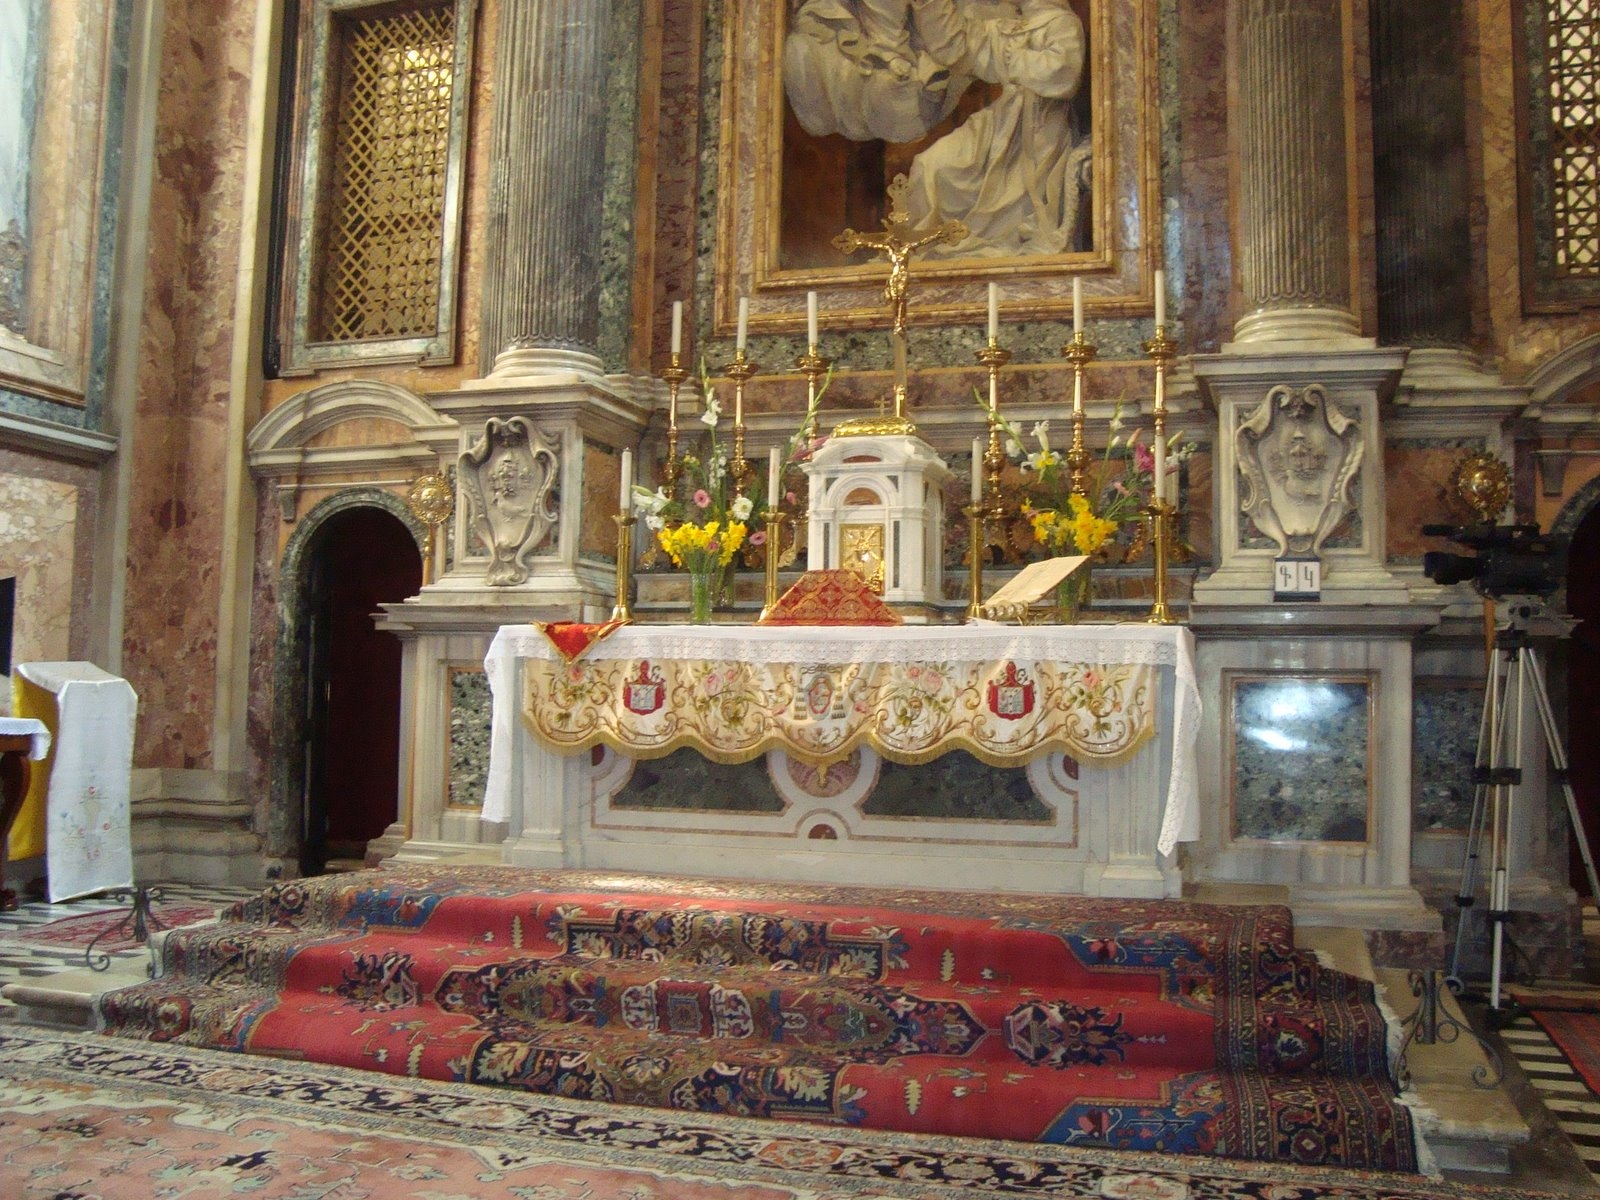 Liturgy in Rome dedicated to the memory of Armenian Genocide victims